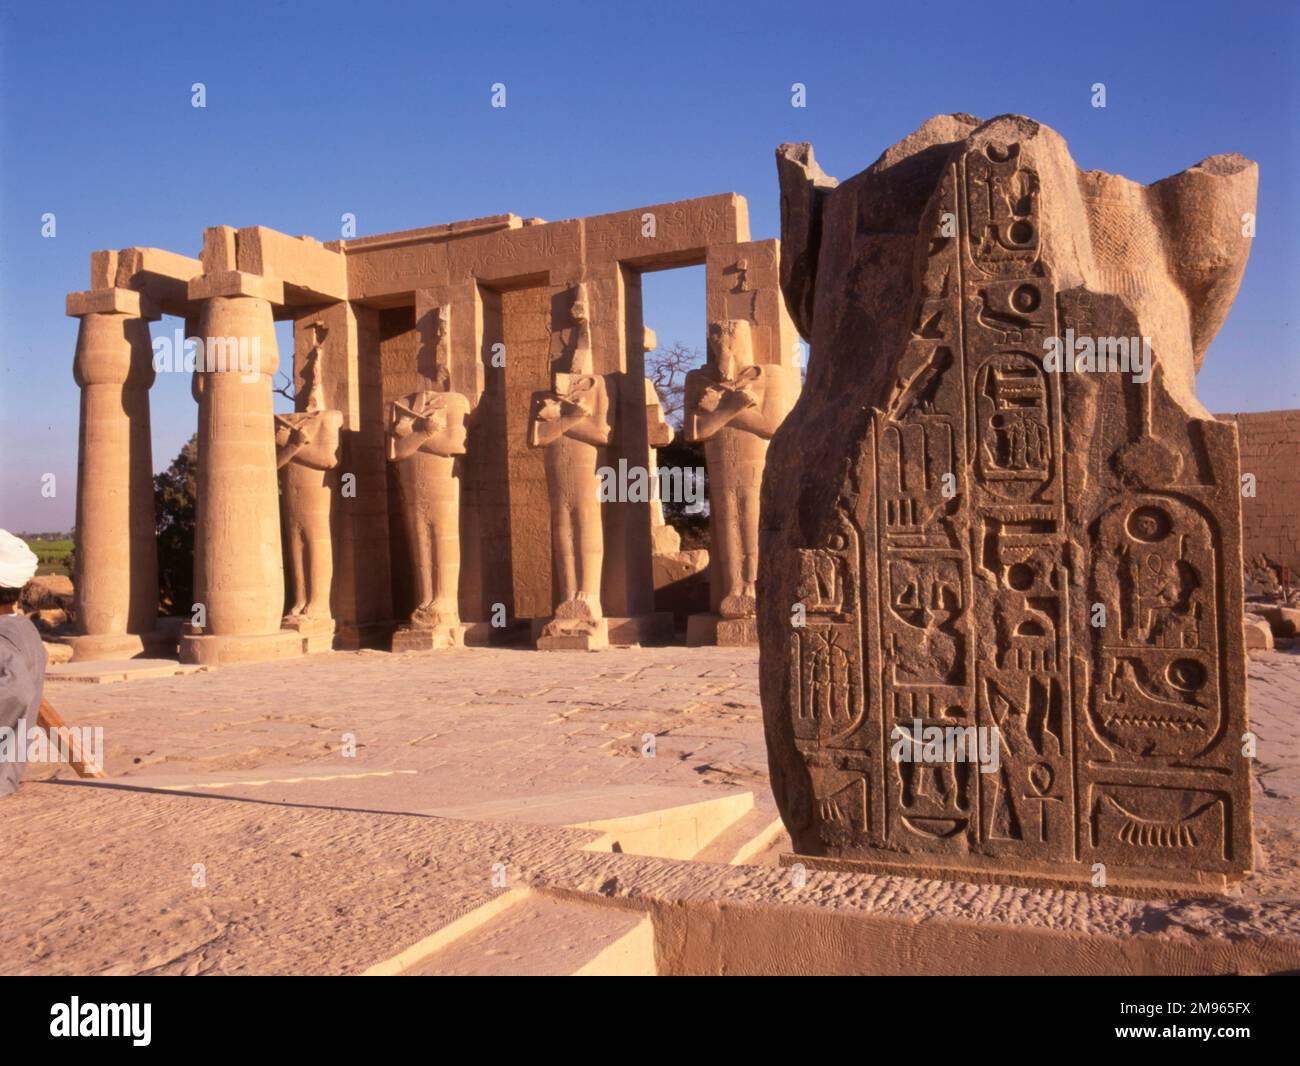 The 'Ramesseum', Thebes (Luxor), Egypt, showing 4 Osiris posts and 2 Papyrus pillars of the 2nd Pylon, with the fallen statue of Rameses II beside them. Stock Photo